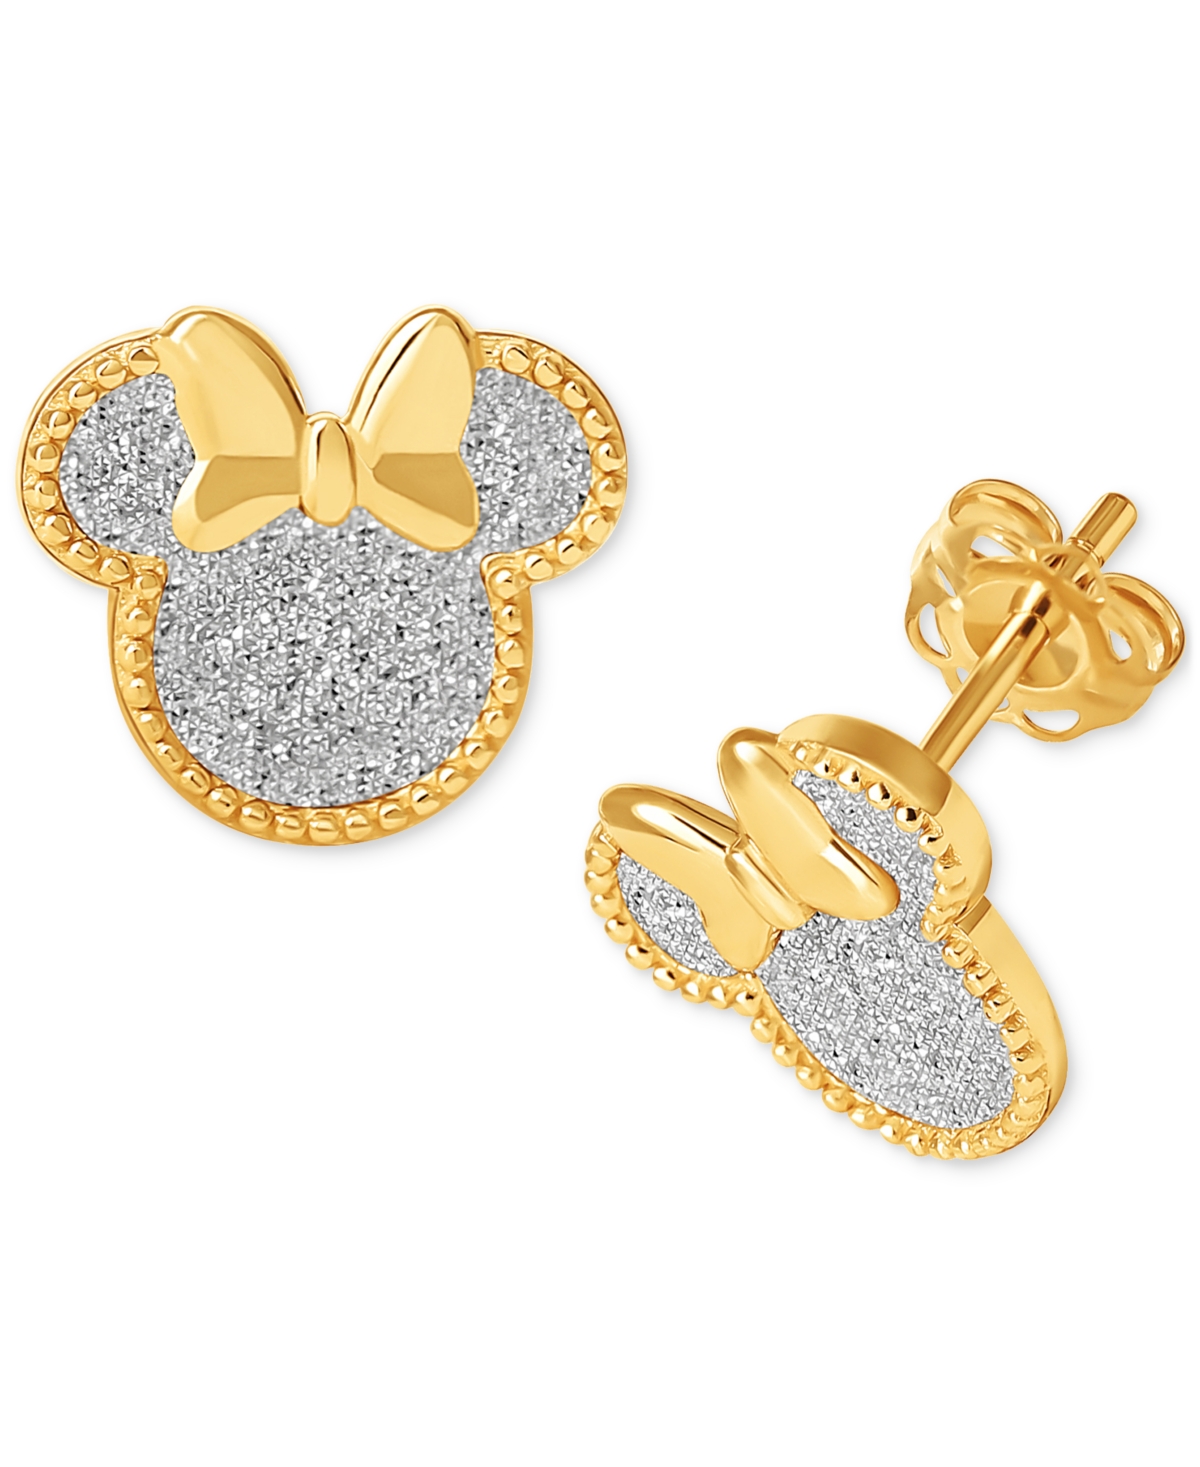 Disney Minnie Mouse Glitter Stud Earrings In 18k Gold-plated Sterling Silver In Gold Over Silver